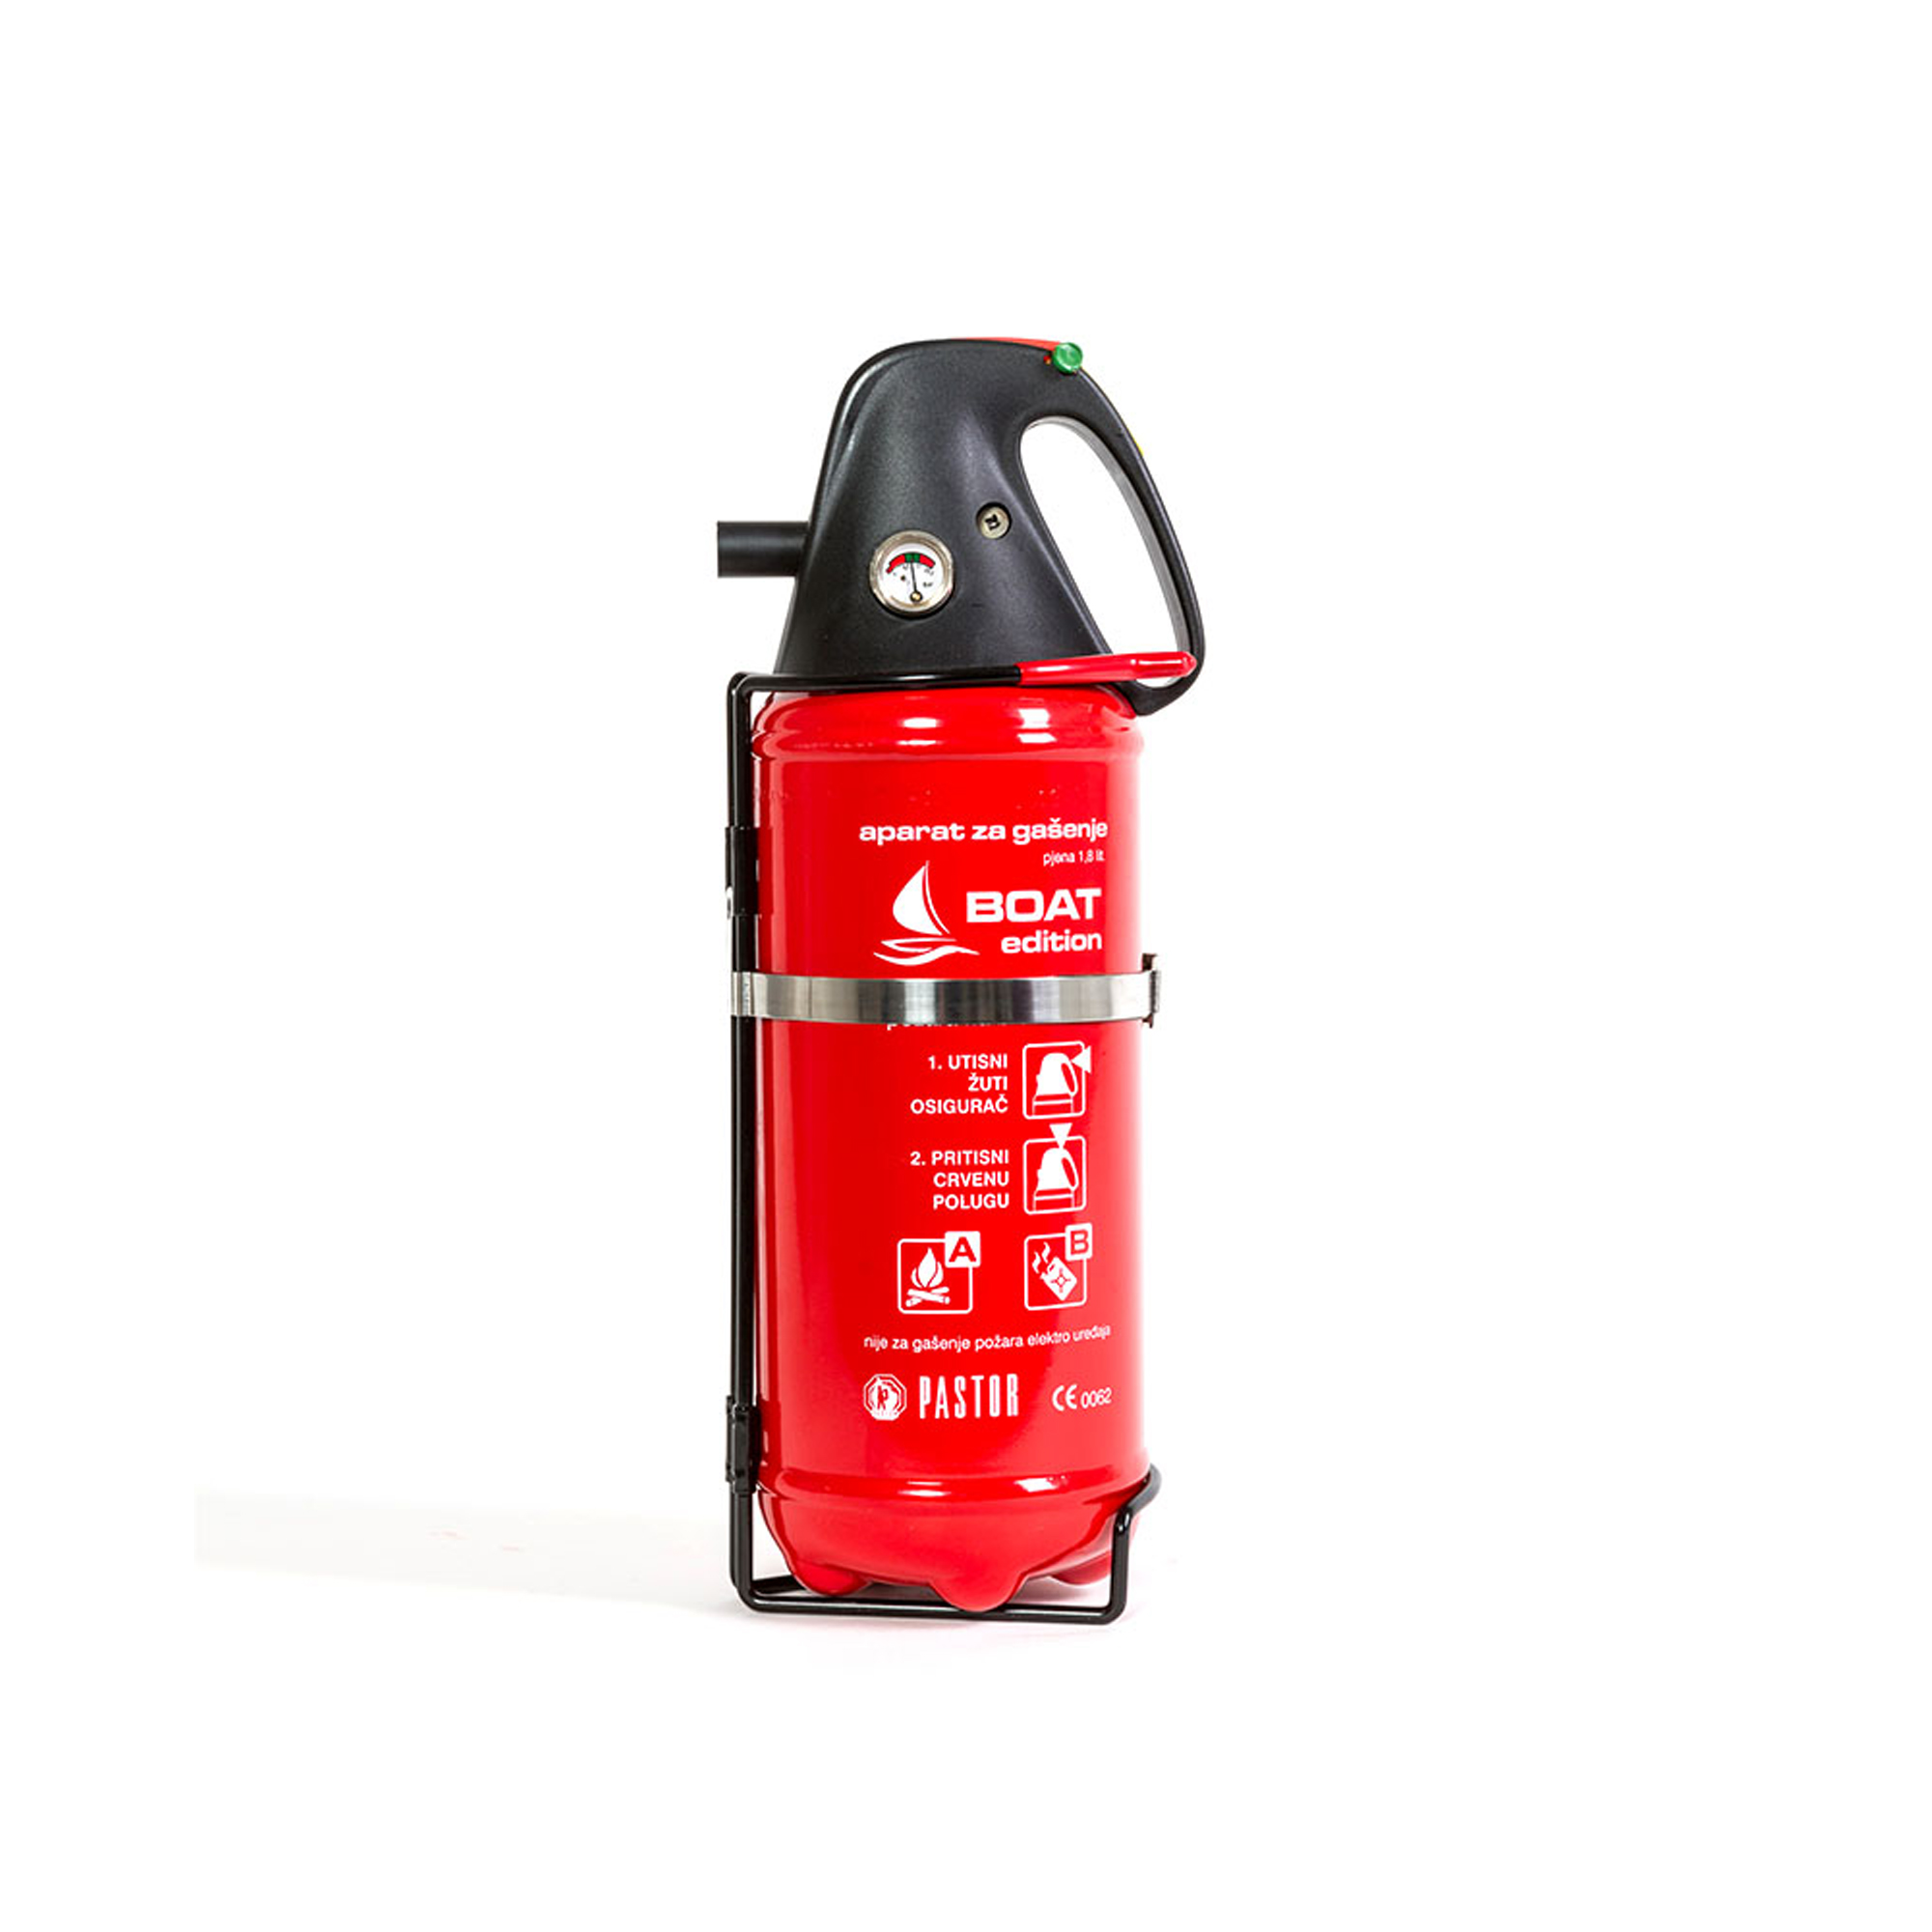 fire extinguisher PZ2E boat edition with foam